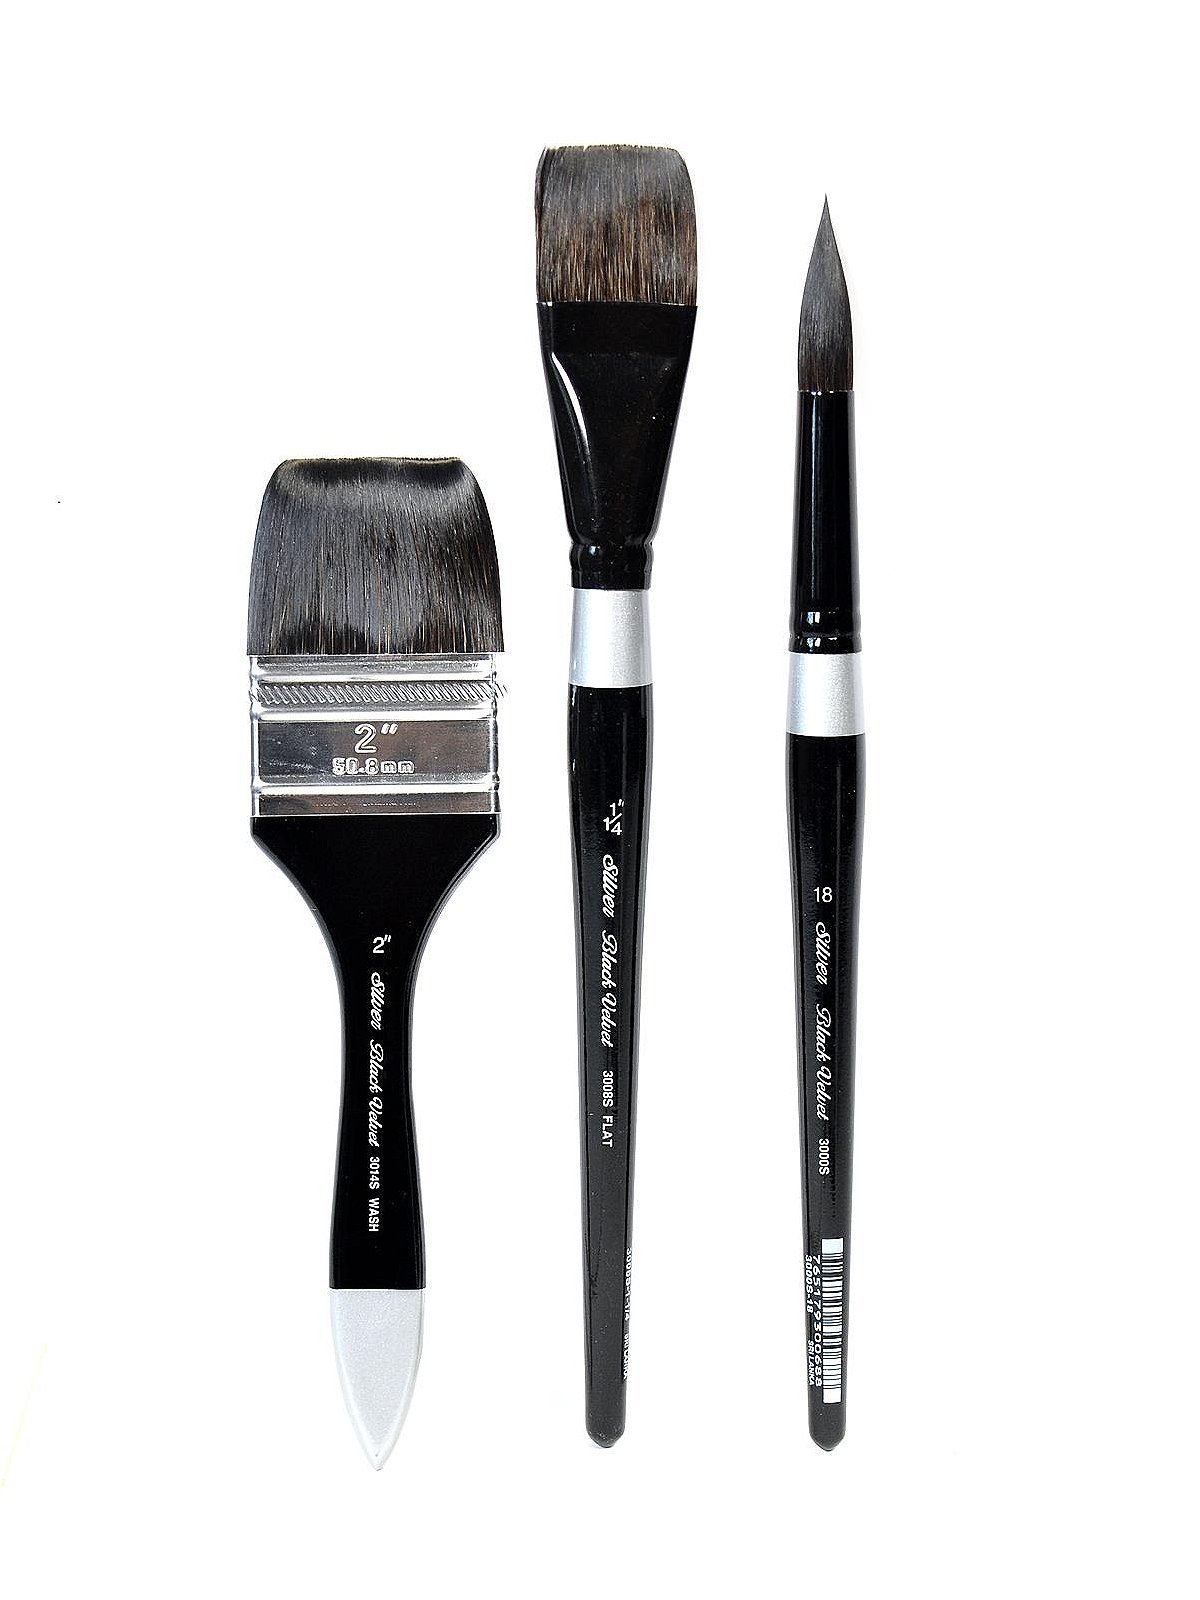 Silver Brush Black Velvet Brushes Collection, Black Velvet Brushes Create  Soft, Versatile Strokes with A Variety of Media. - AliExpress